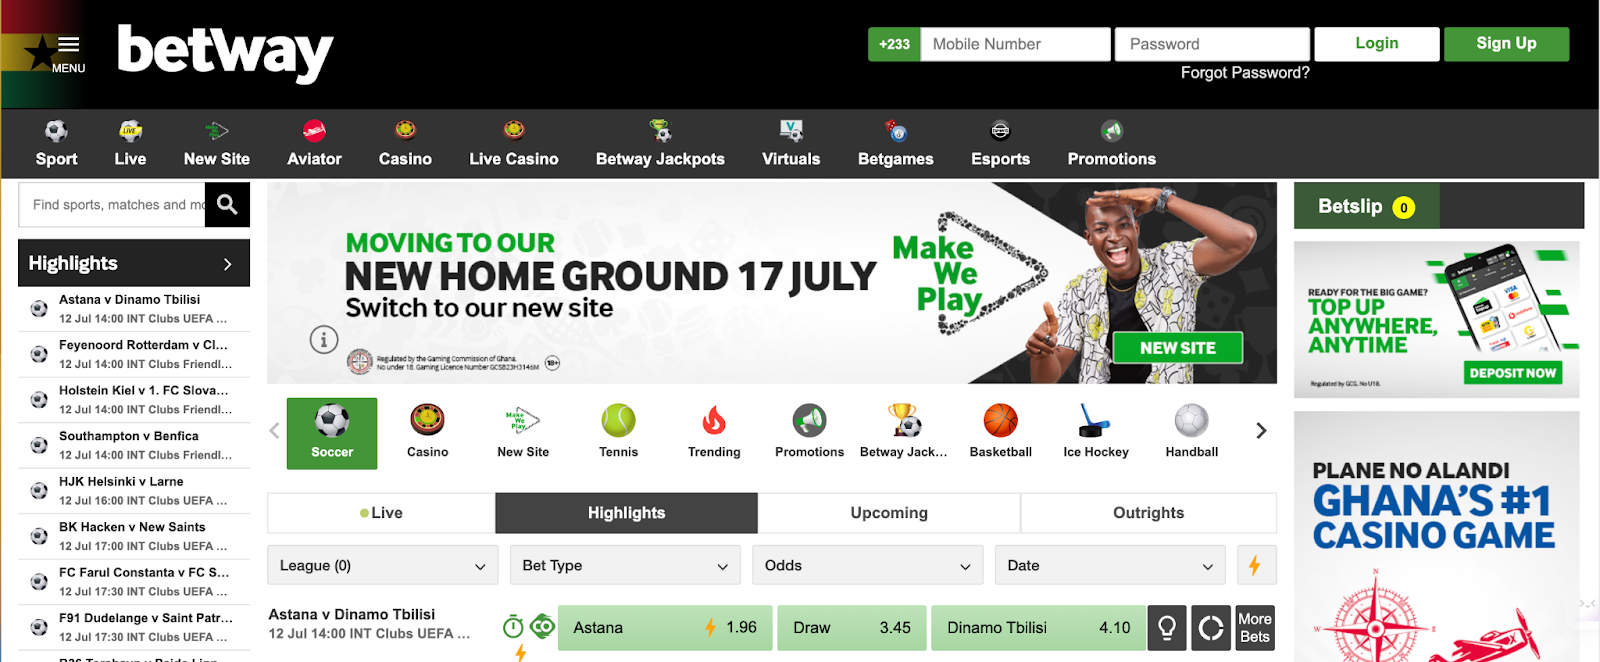 BetWay home Page